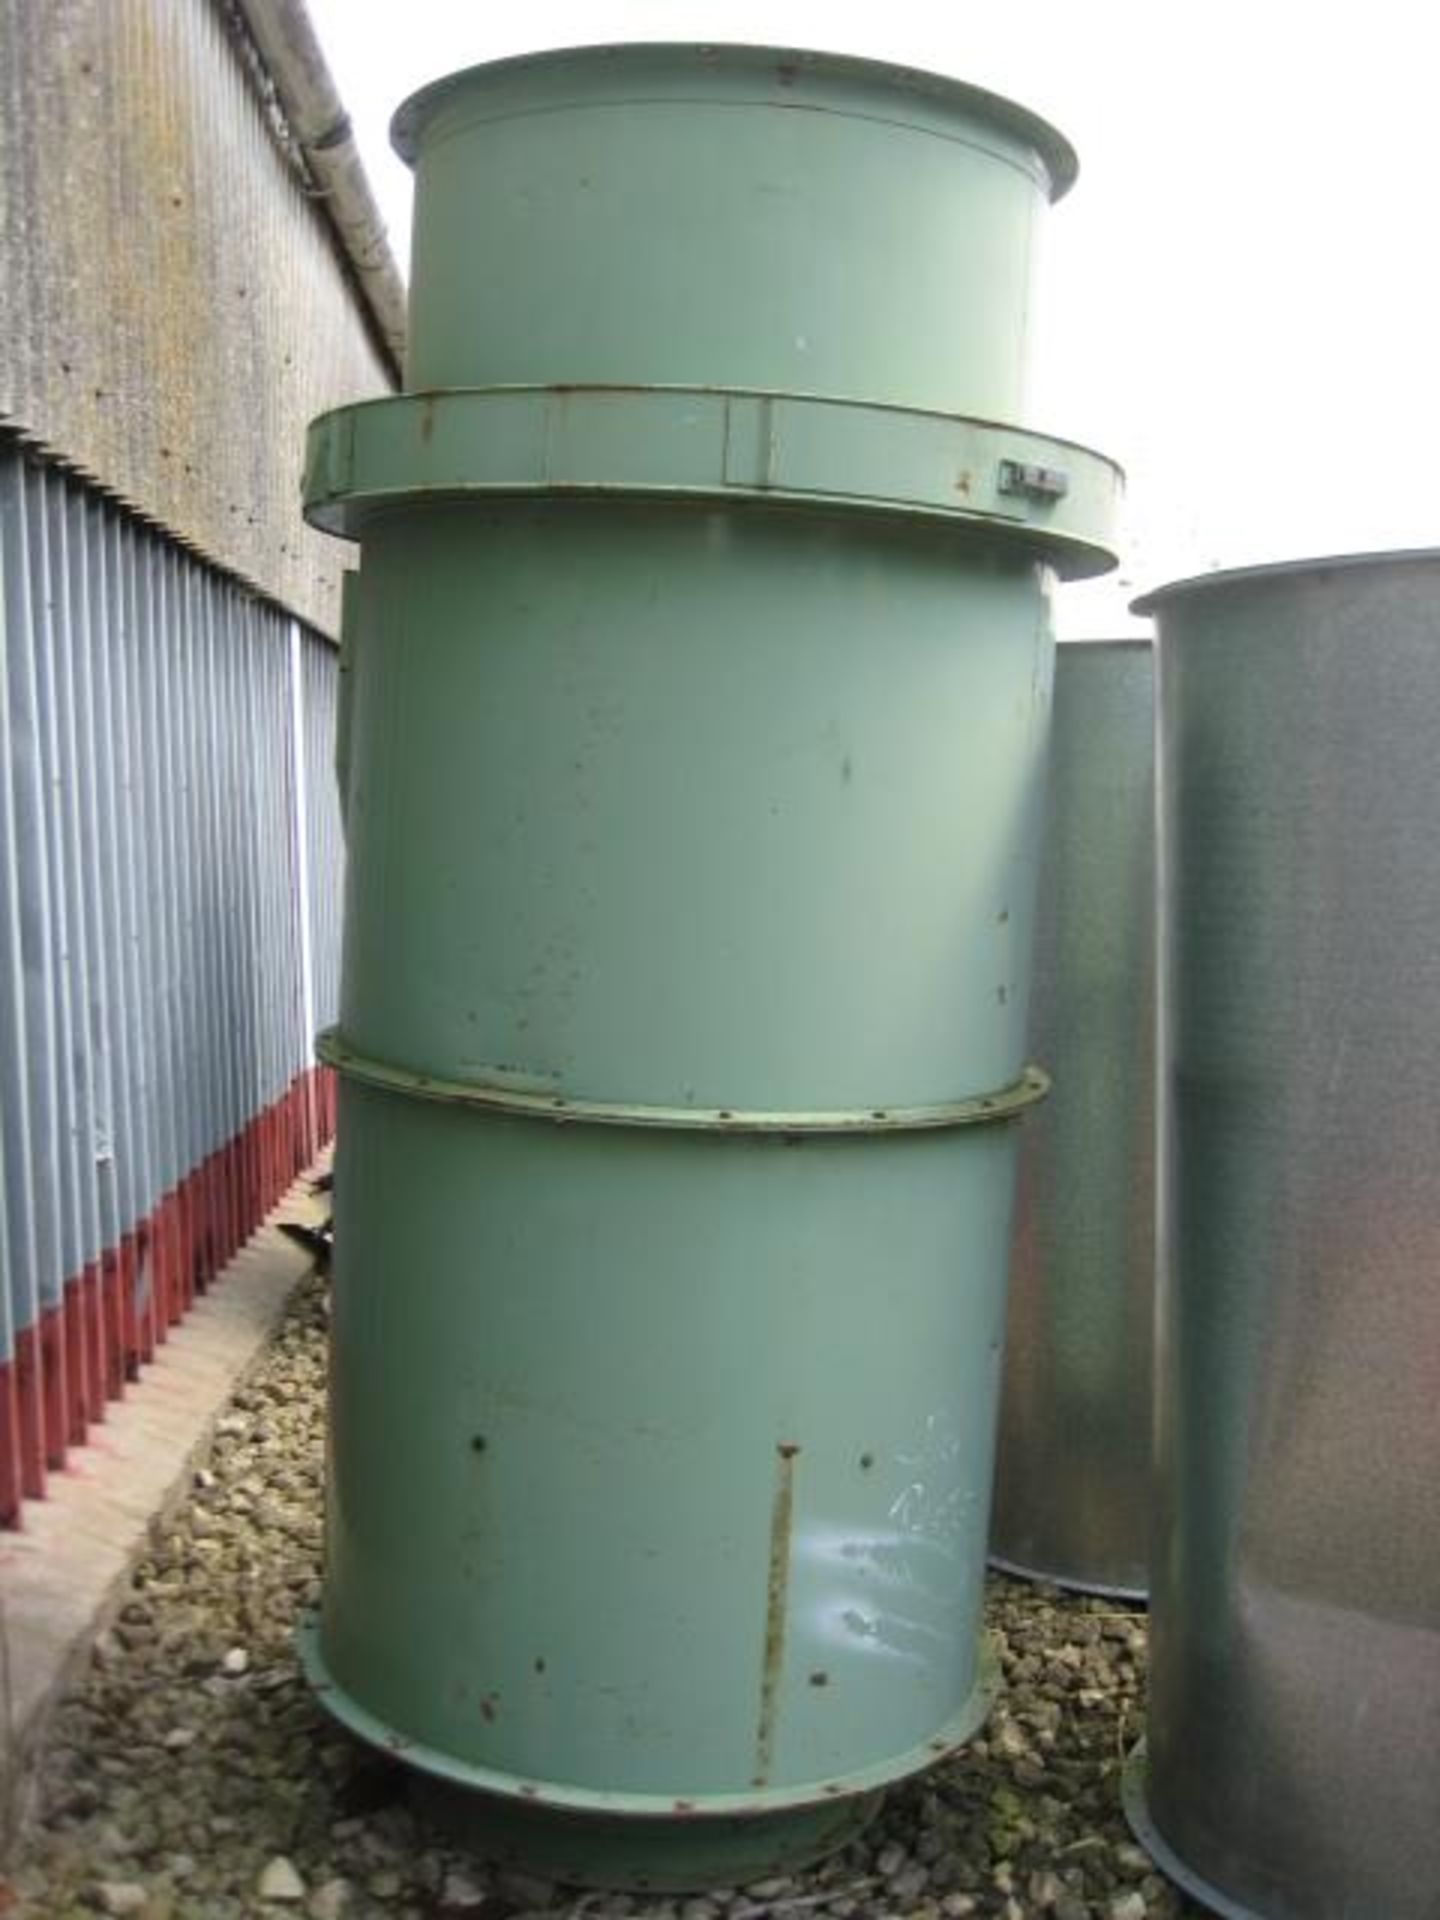 Cimbria Cyclofan CF20, with 15kW fan, serial no. 14811, body approx. 1000mm dia. Lot located at